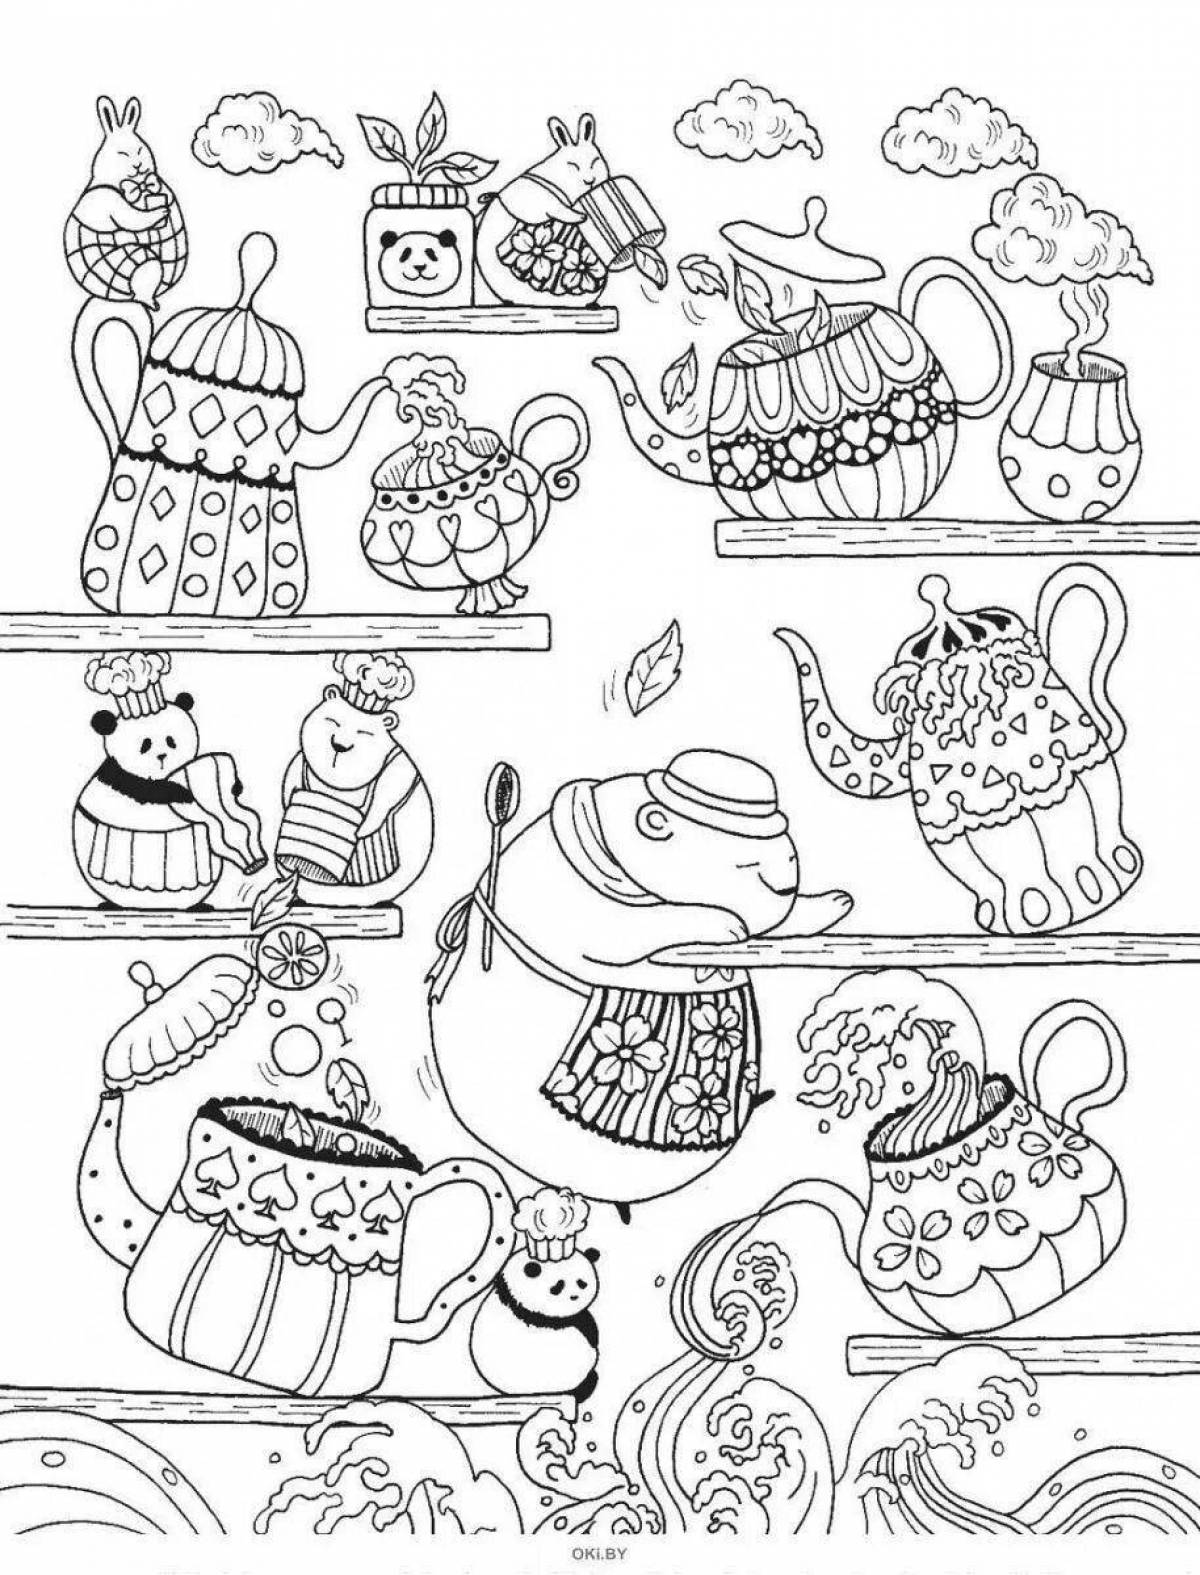 Sunny million bears coloring page